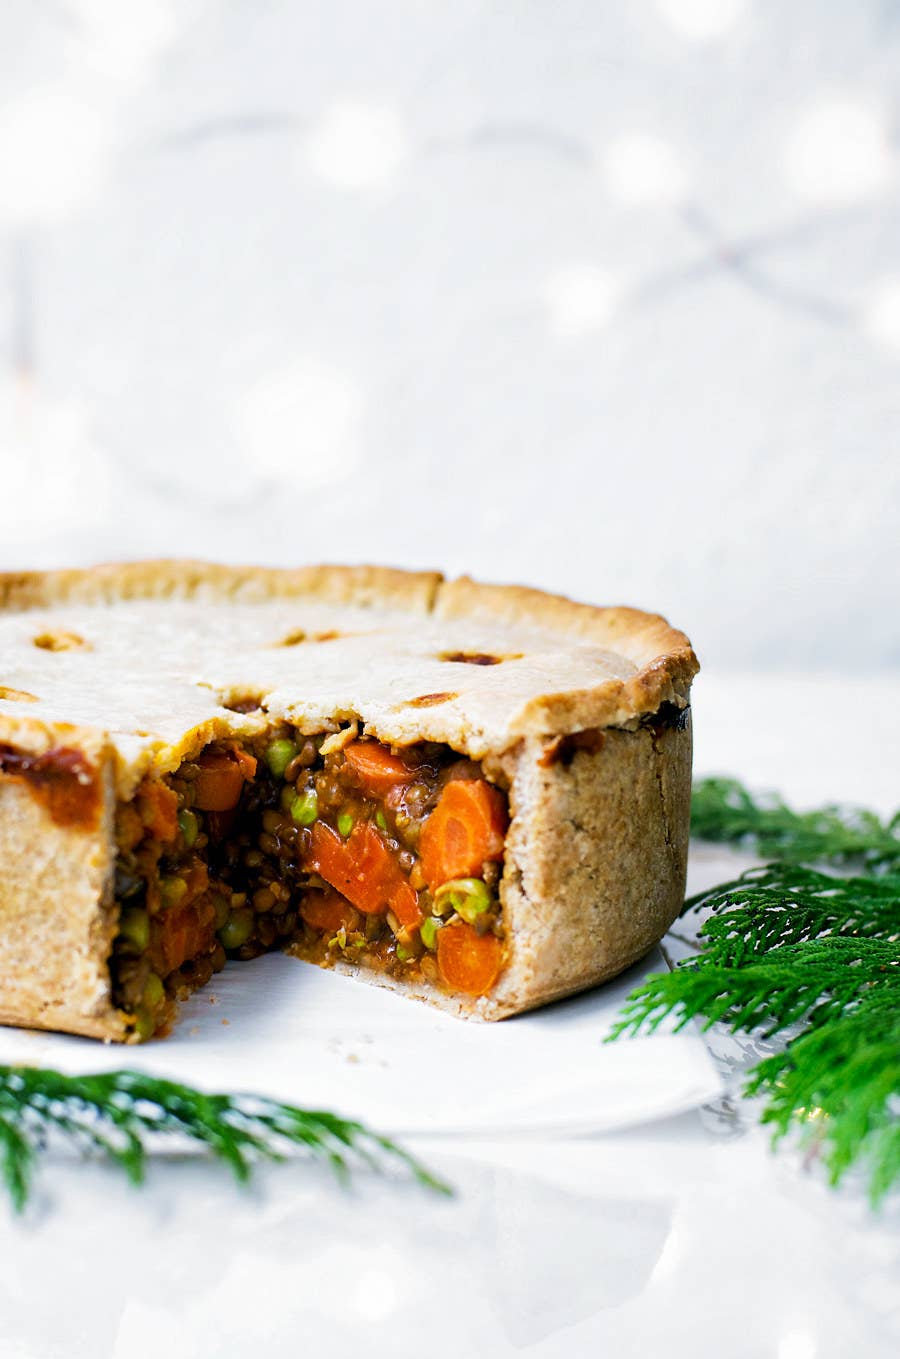 38 Vegan Holiday Recipes For Thanksgiving, Christmas & More